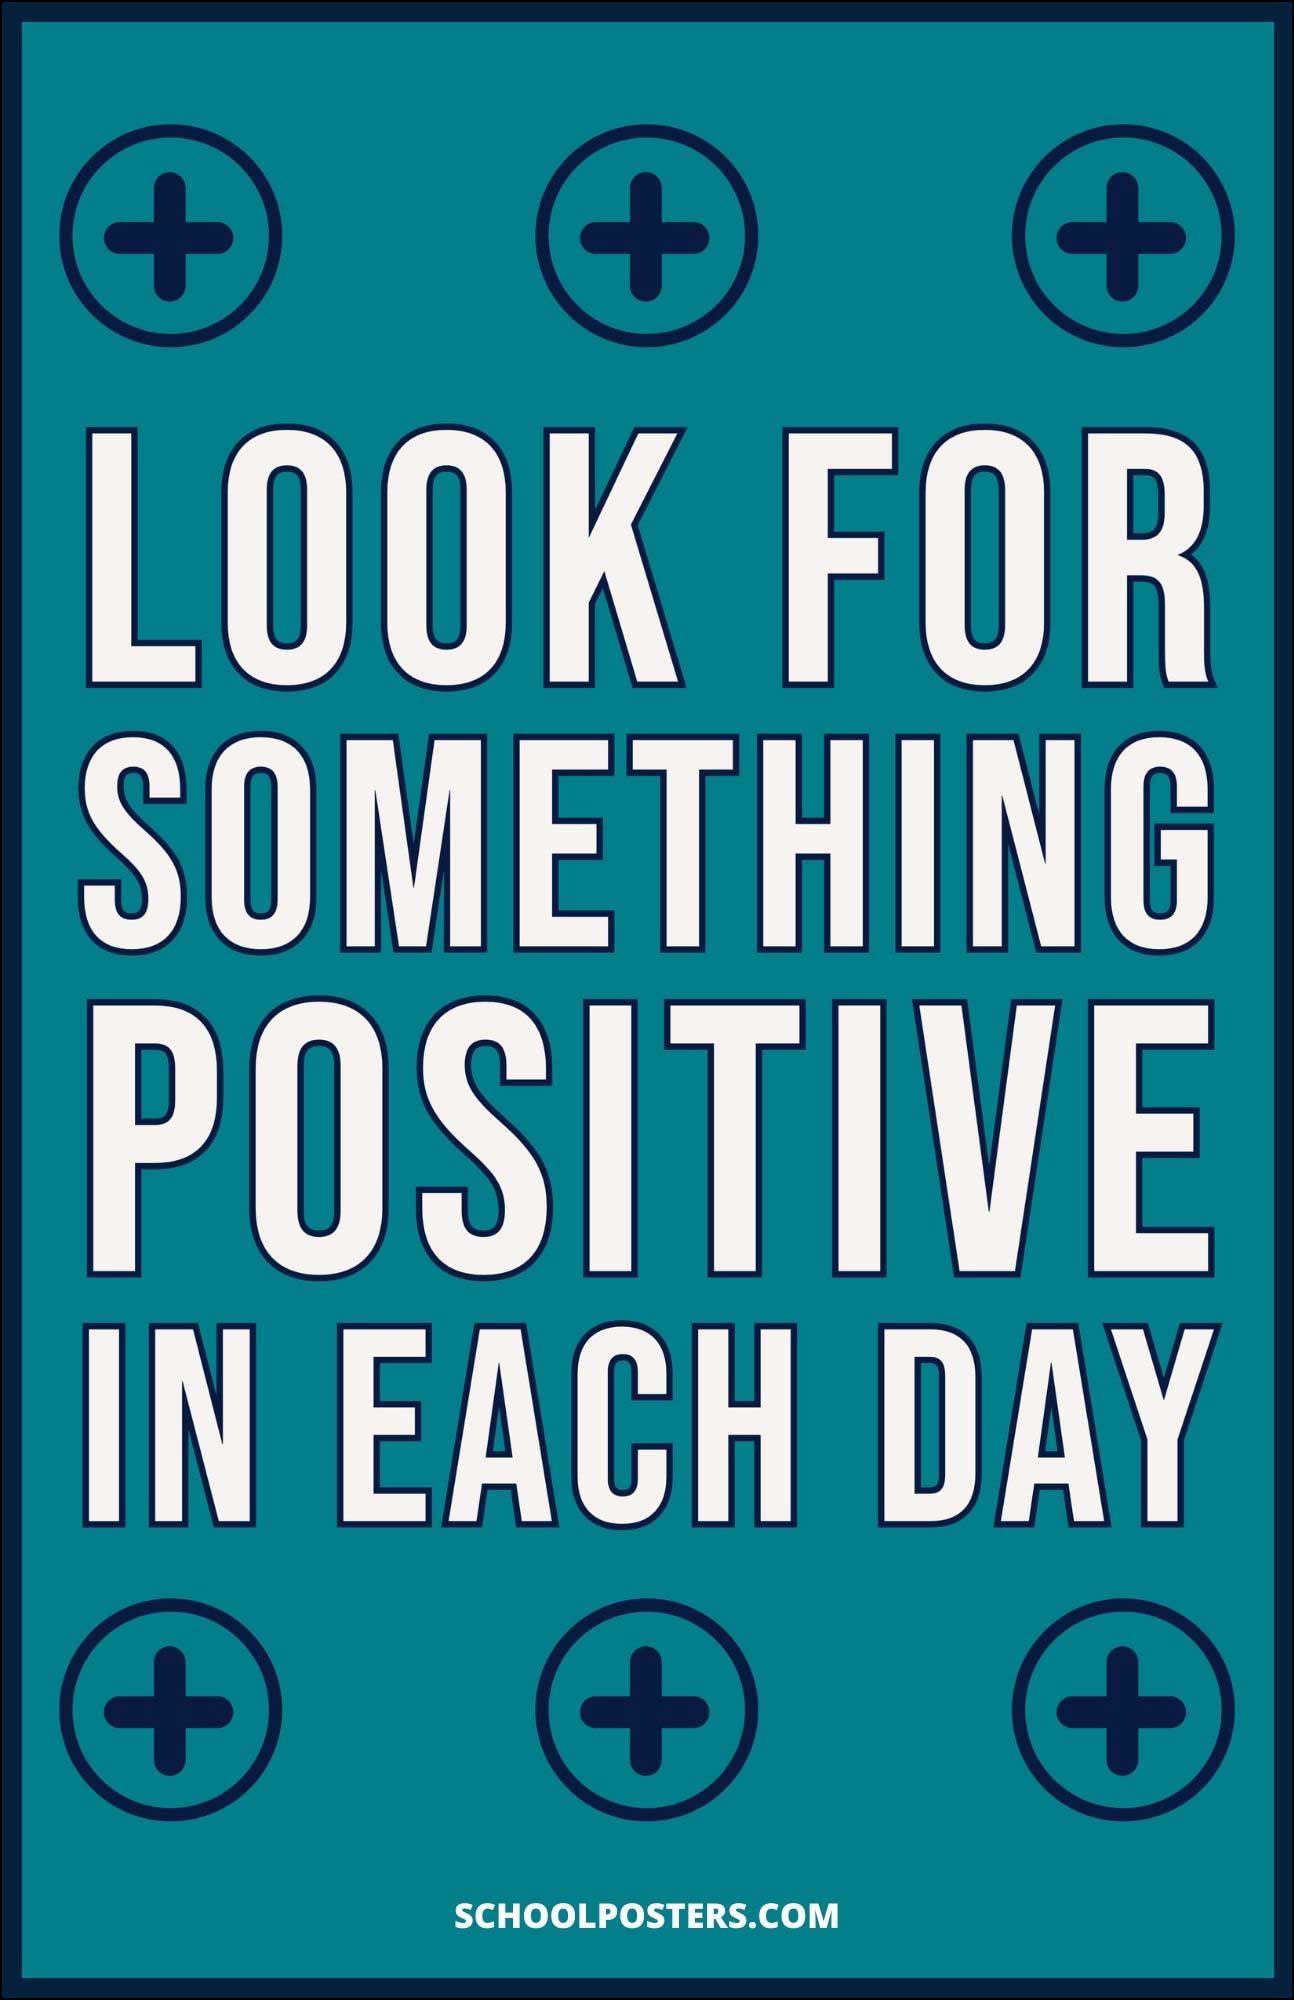 Look For Something Positive In Each Day Poster